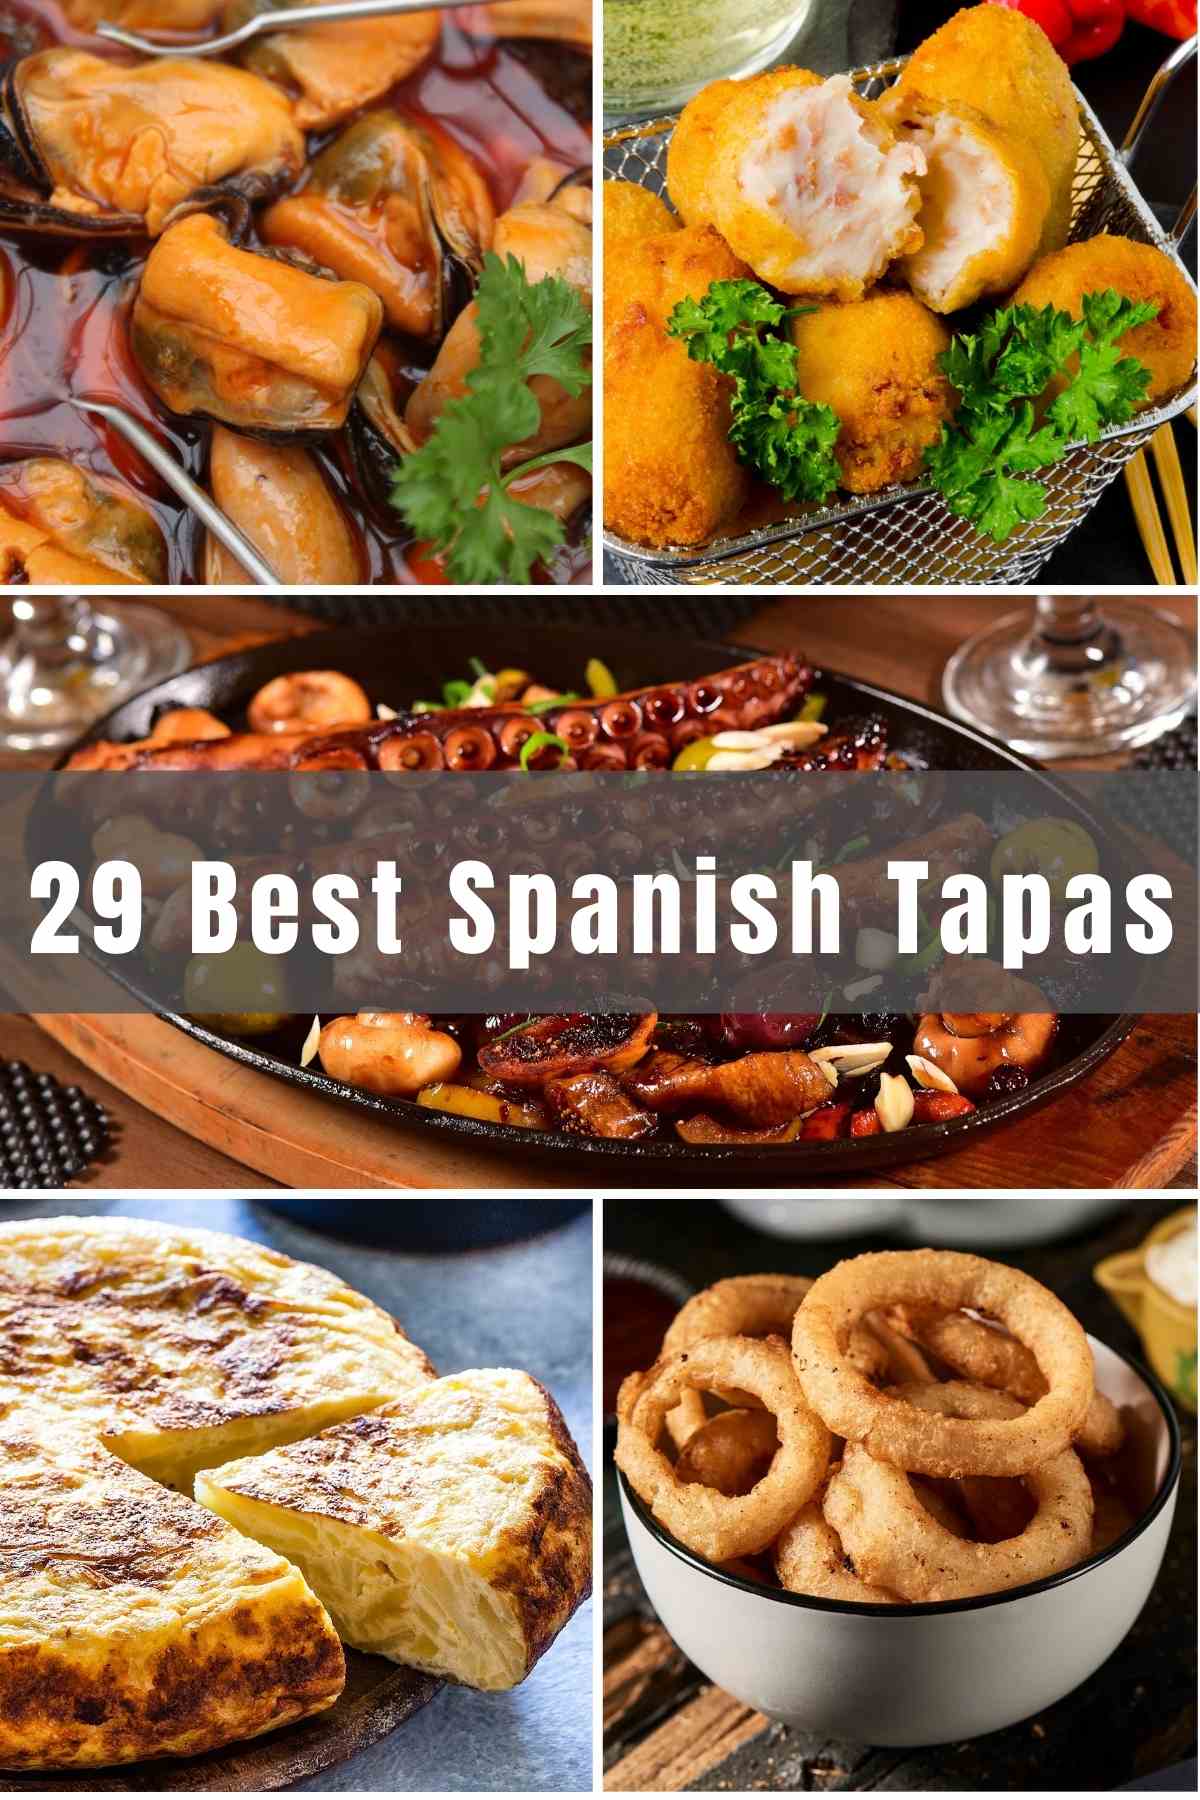 Spanish tapas are a delicious way to start a meal, or to sample a variety of small plates. If you’ve enjoyed them in Spain, or at a local Spanish restaurant, you know there are many delicious options. We’ve rounded up the most popular Spanish Tapas recipes for you to try at home!